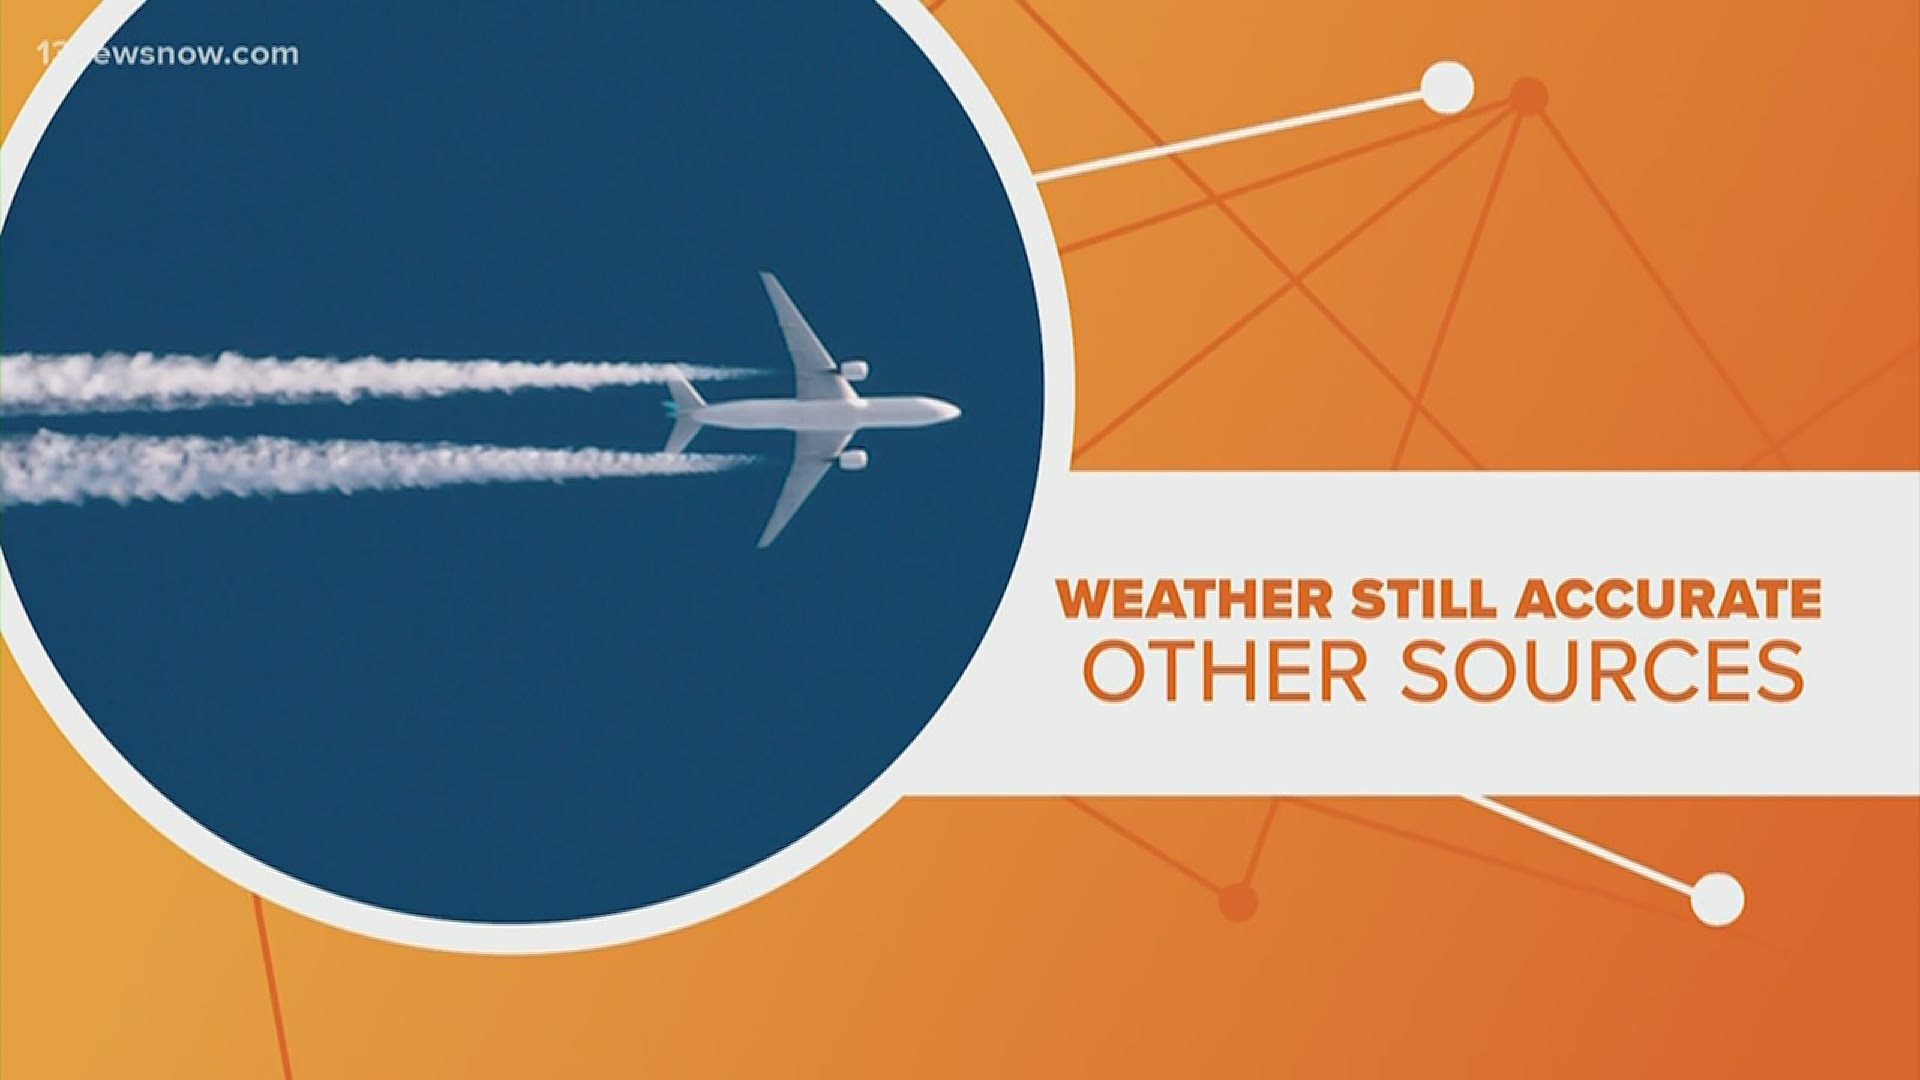 Planes provide information on temperatures and weather conditions while flying their routes. That's been cut back, but there are other ways to predict the weather.